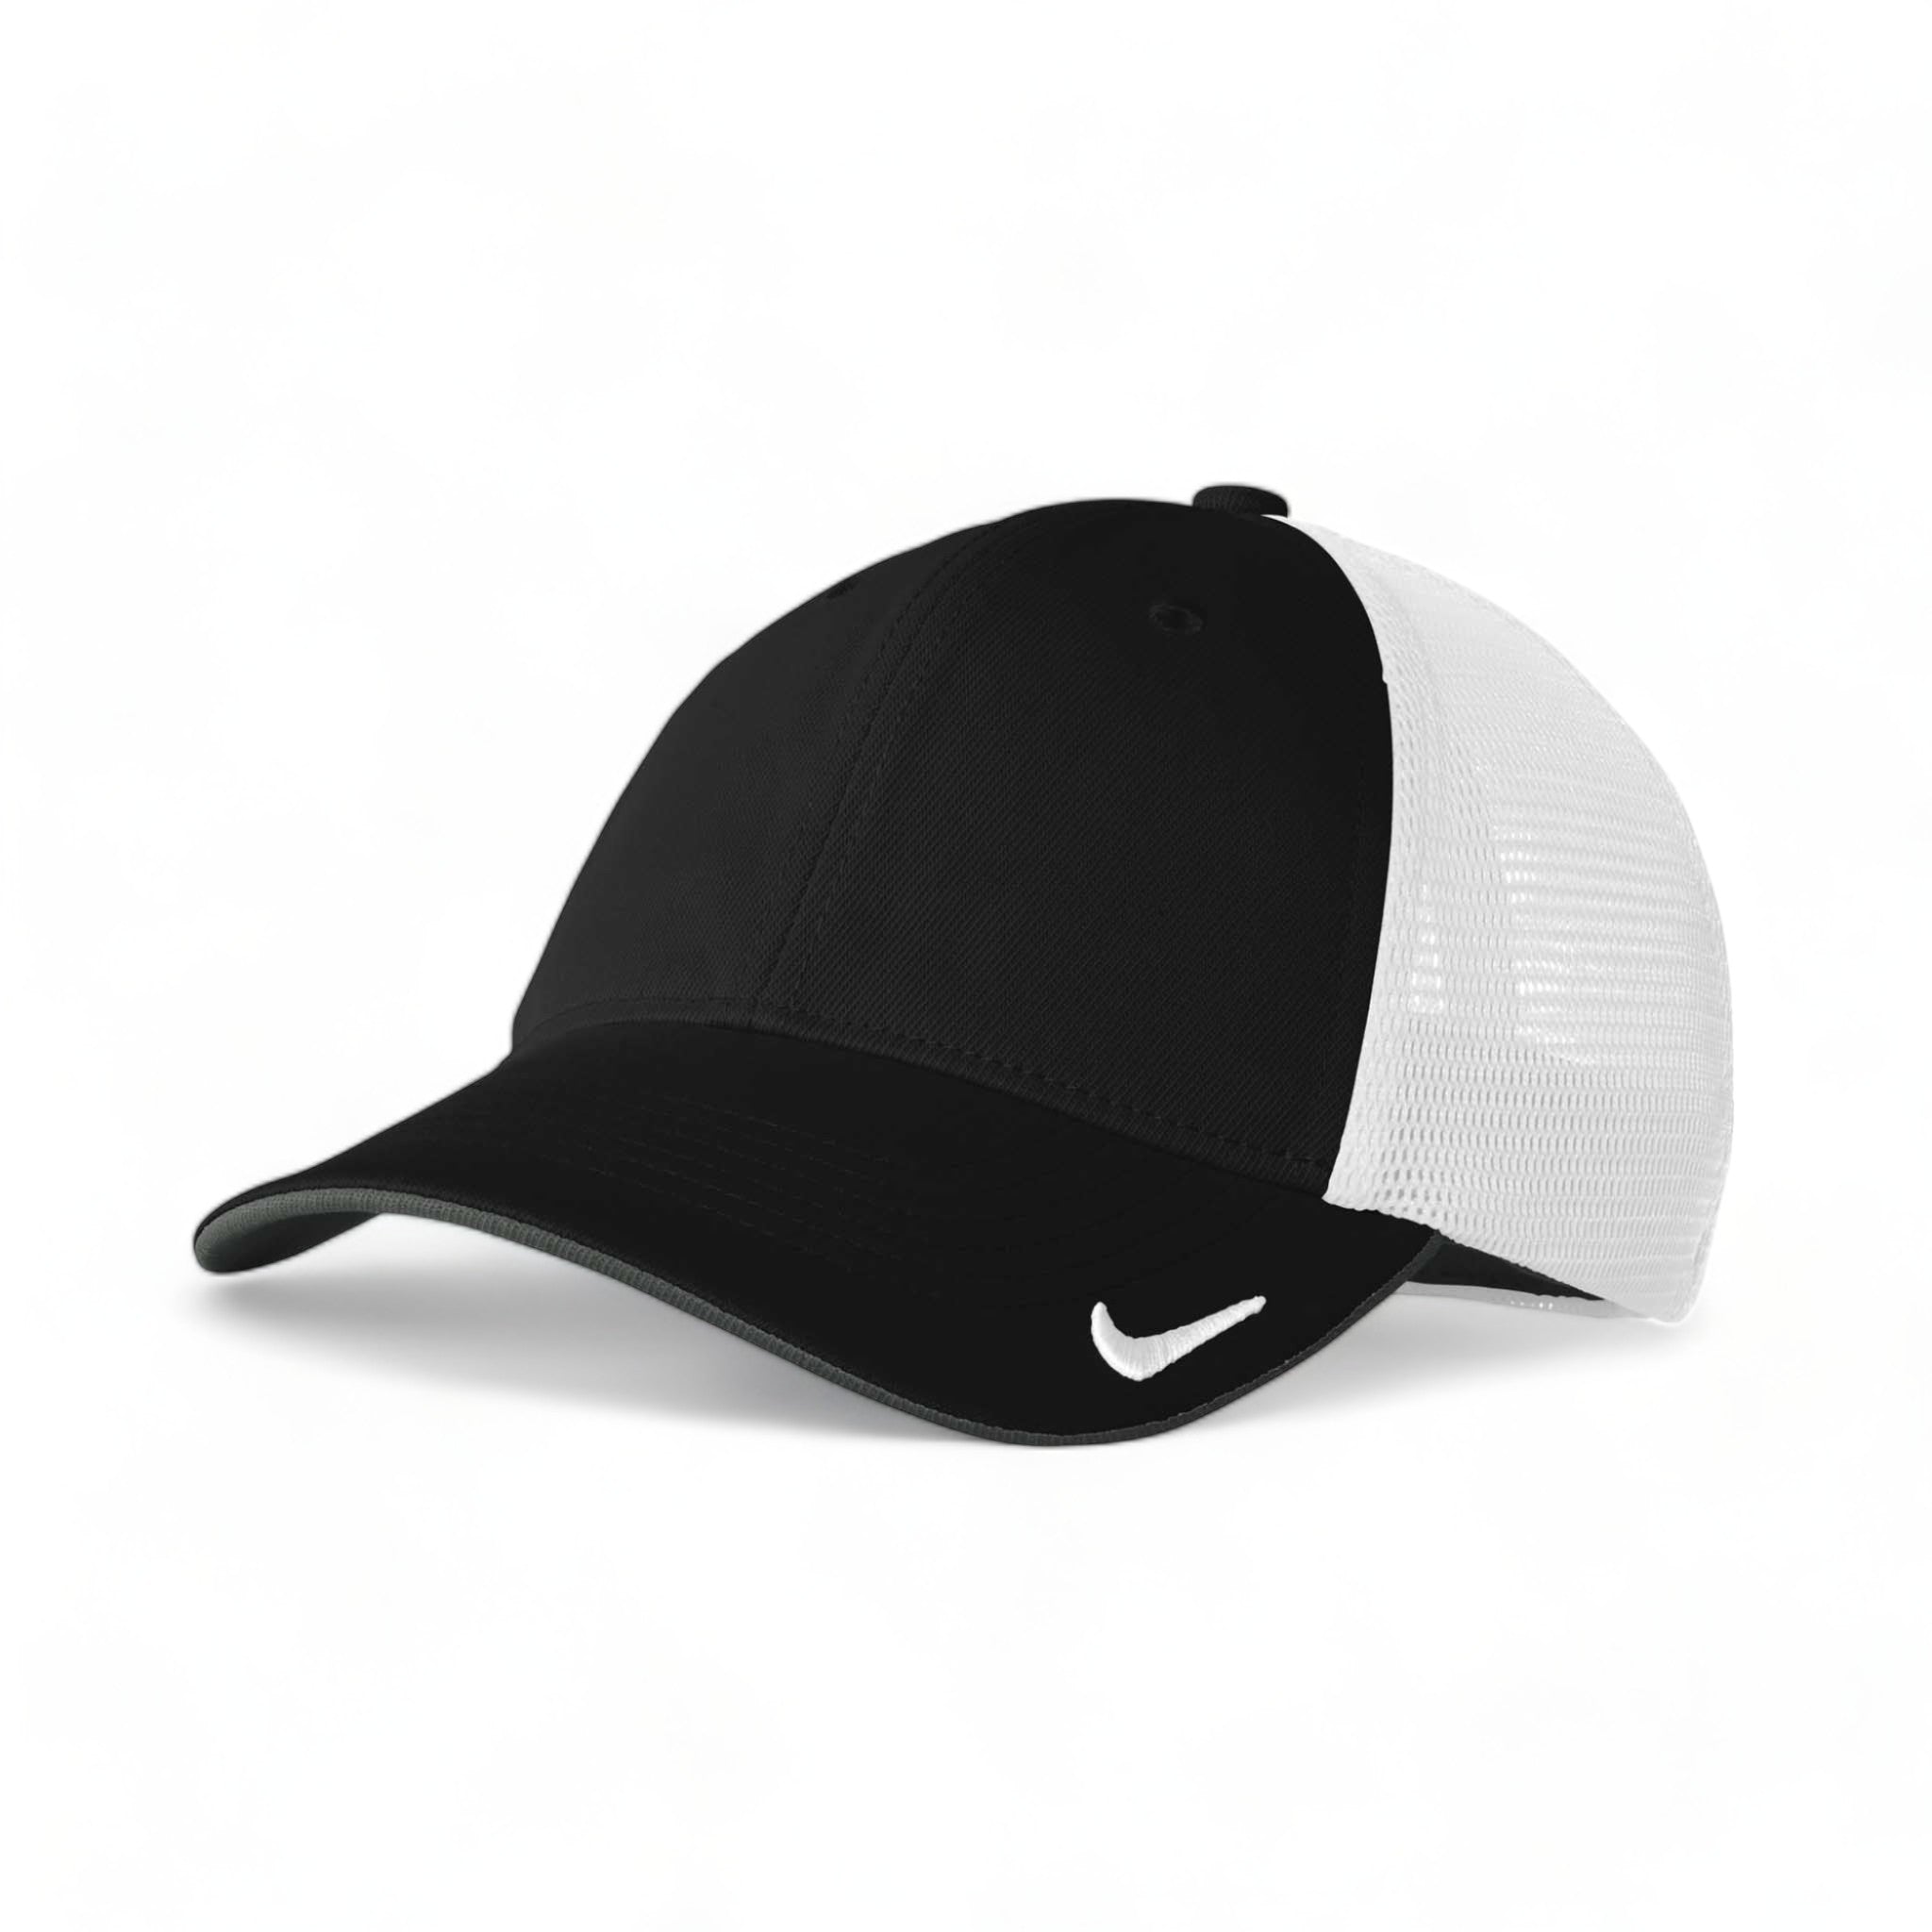 Side view of Nike NKFB6448 custom hat in black and white